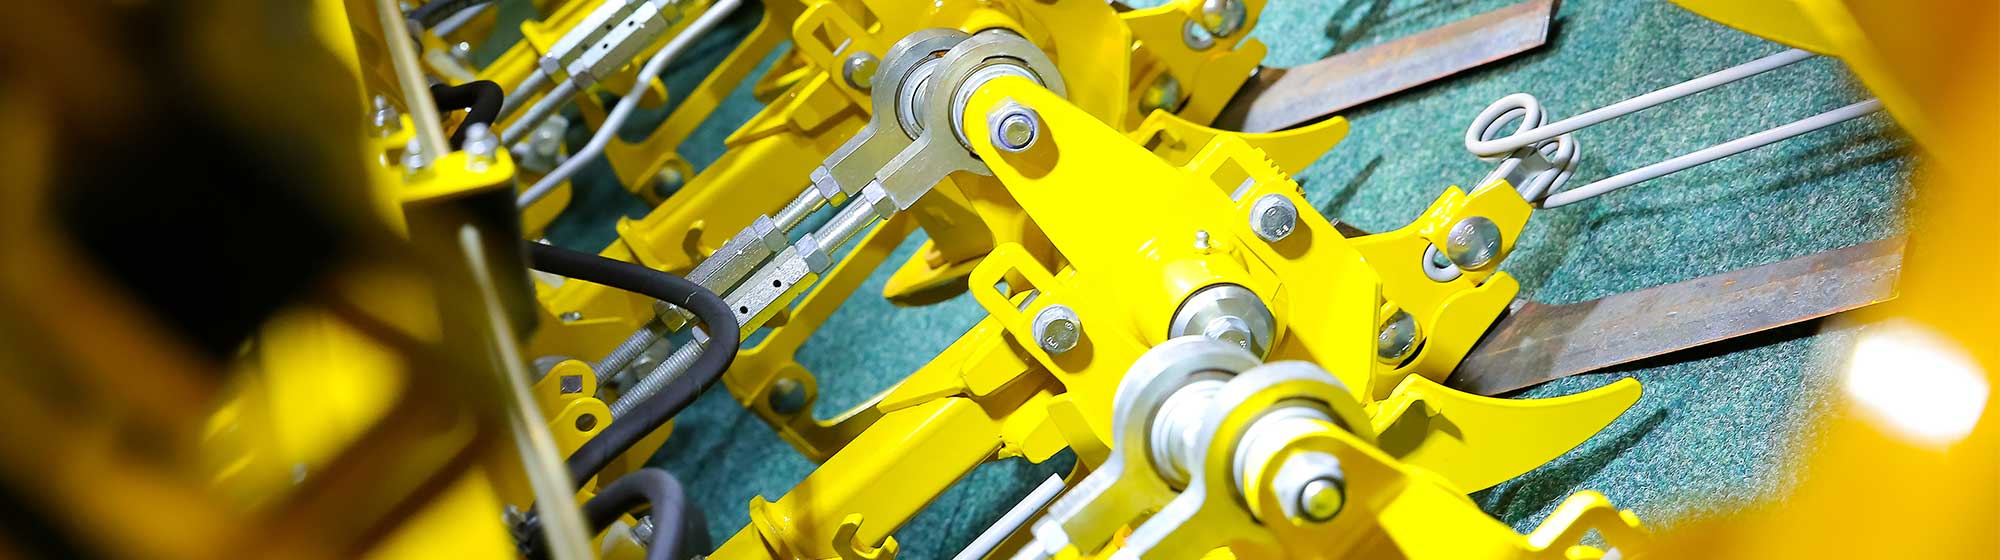 Cogs of a yellow agricultural machine